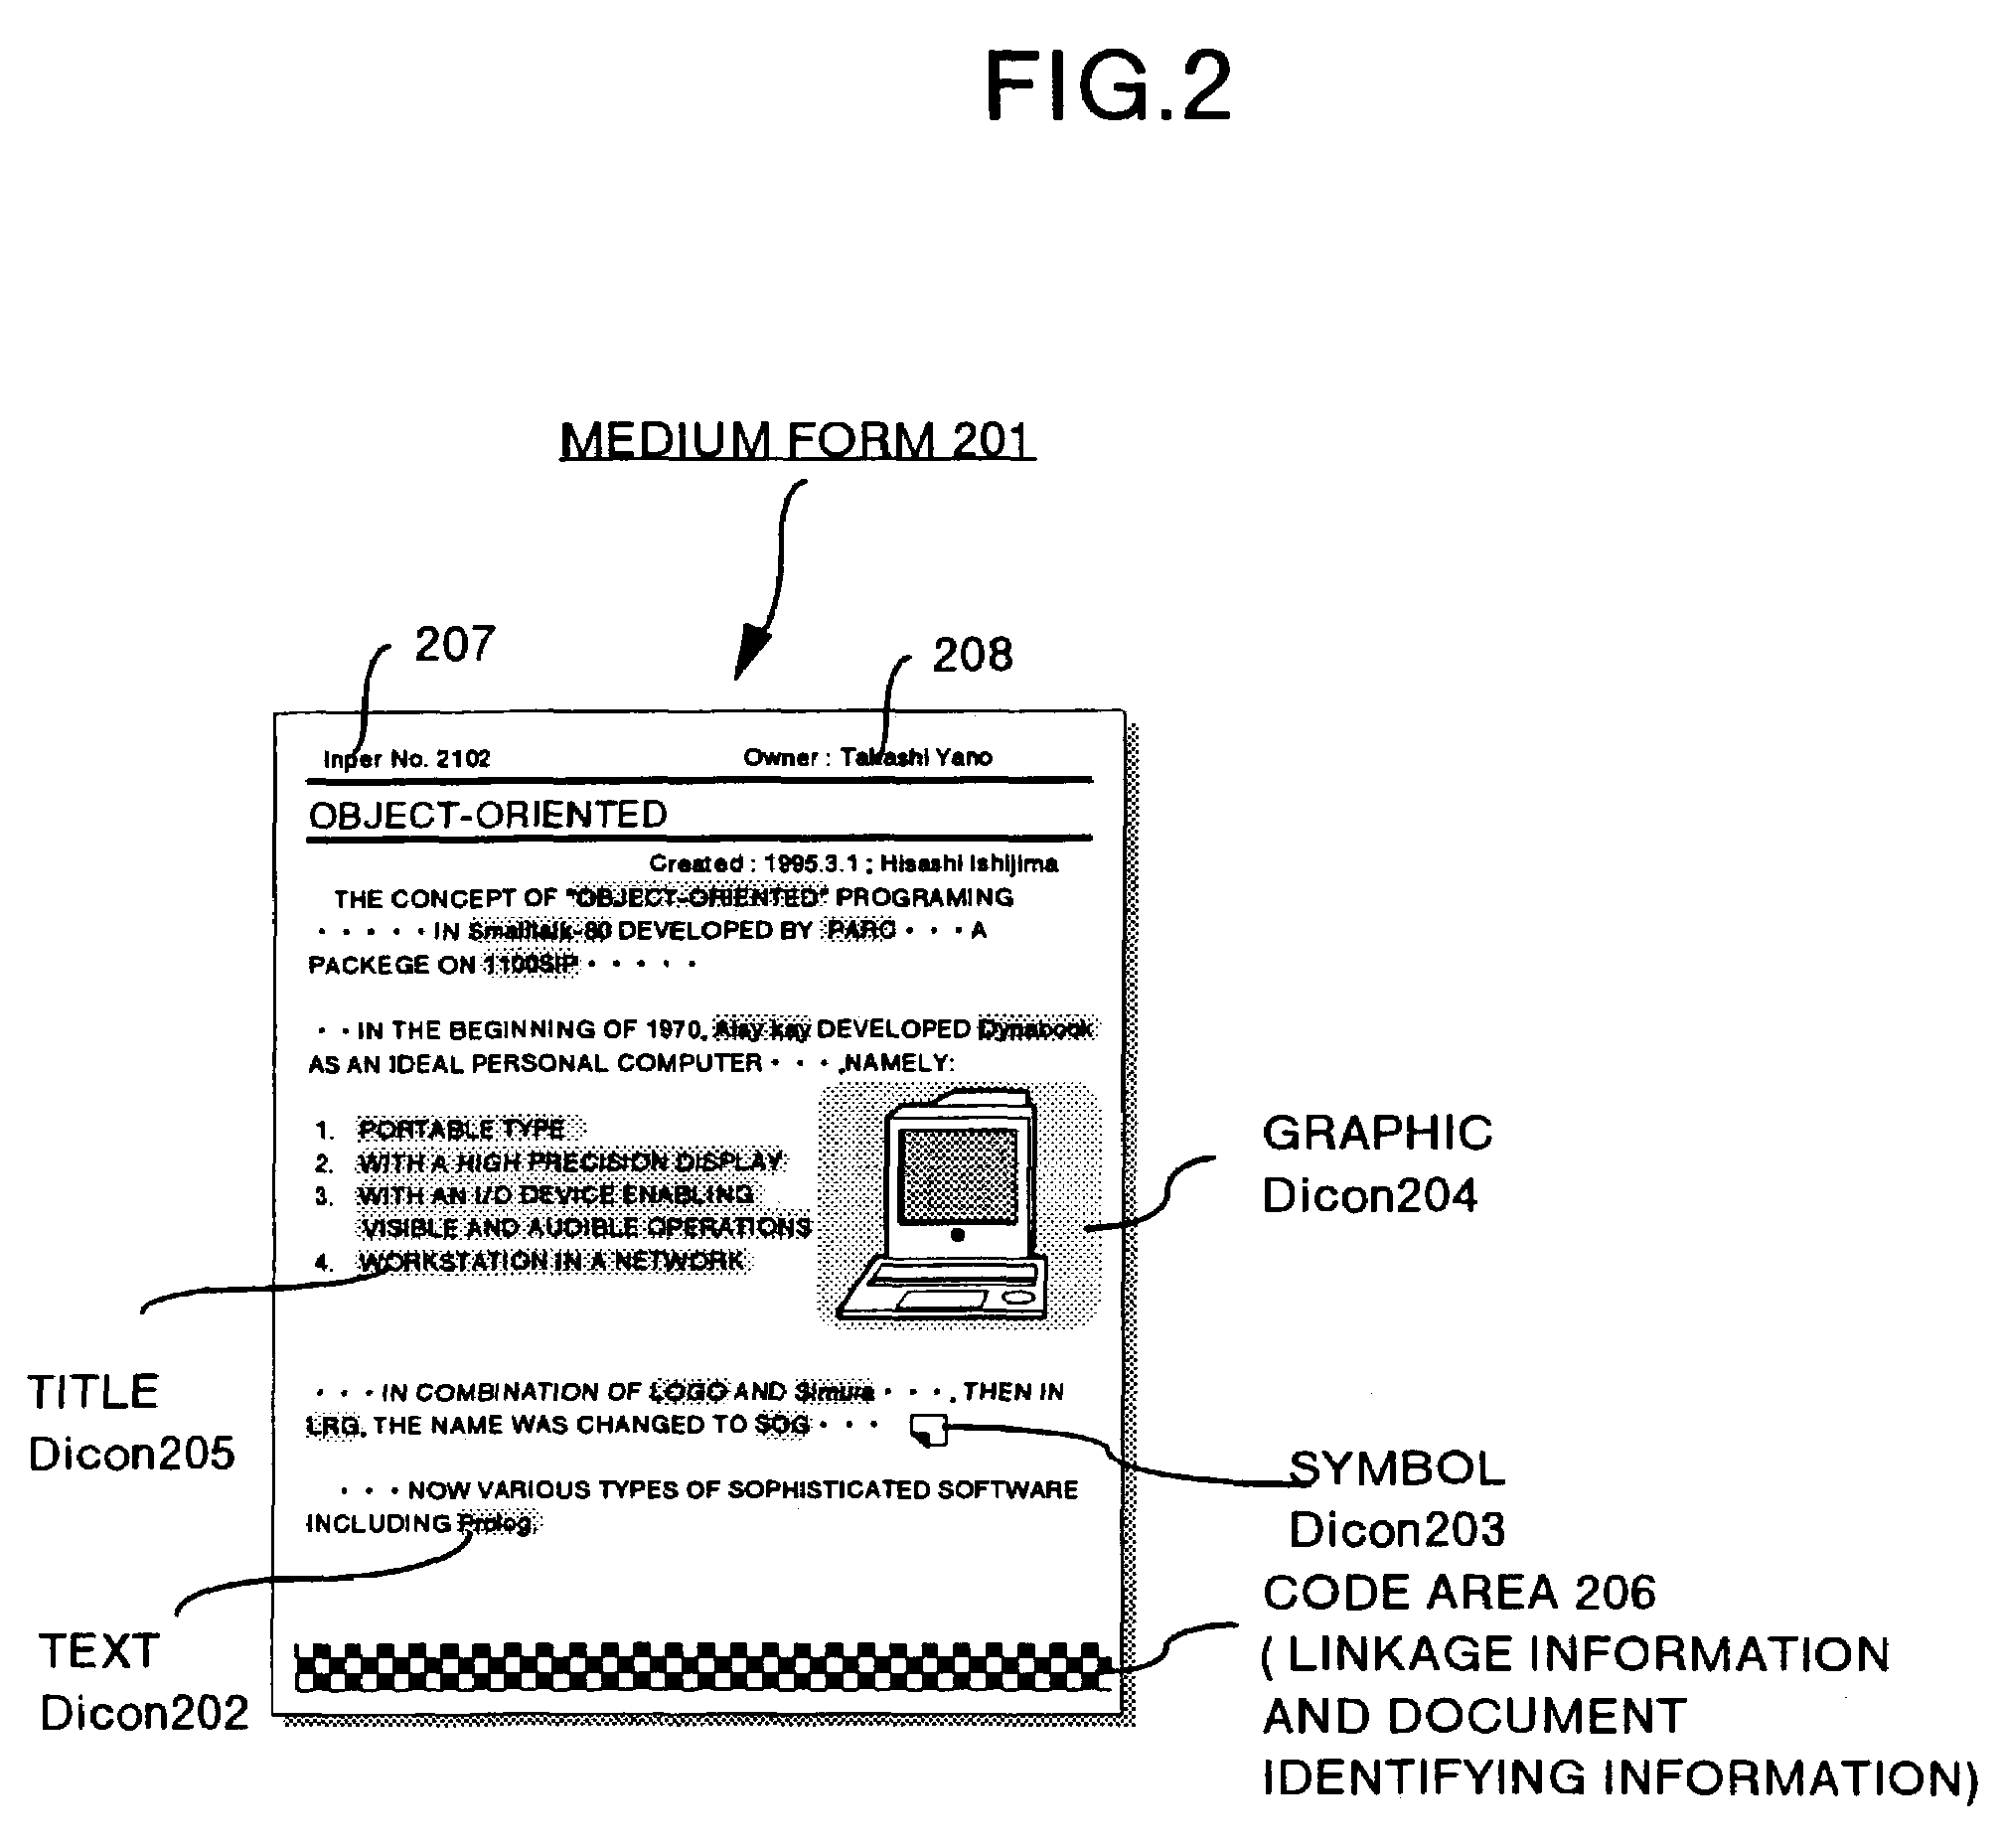 Intermediate address table for converting position information to an address of a link structure correlated information file on a hypertext document